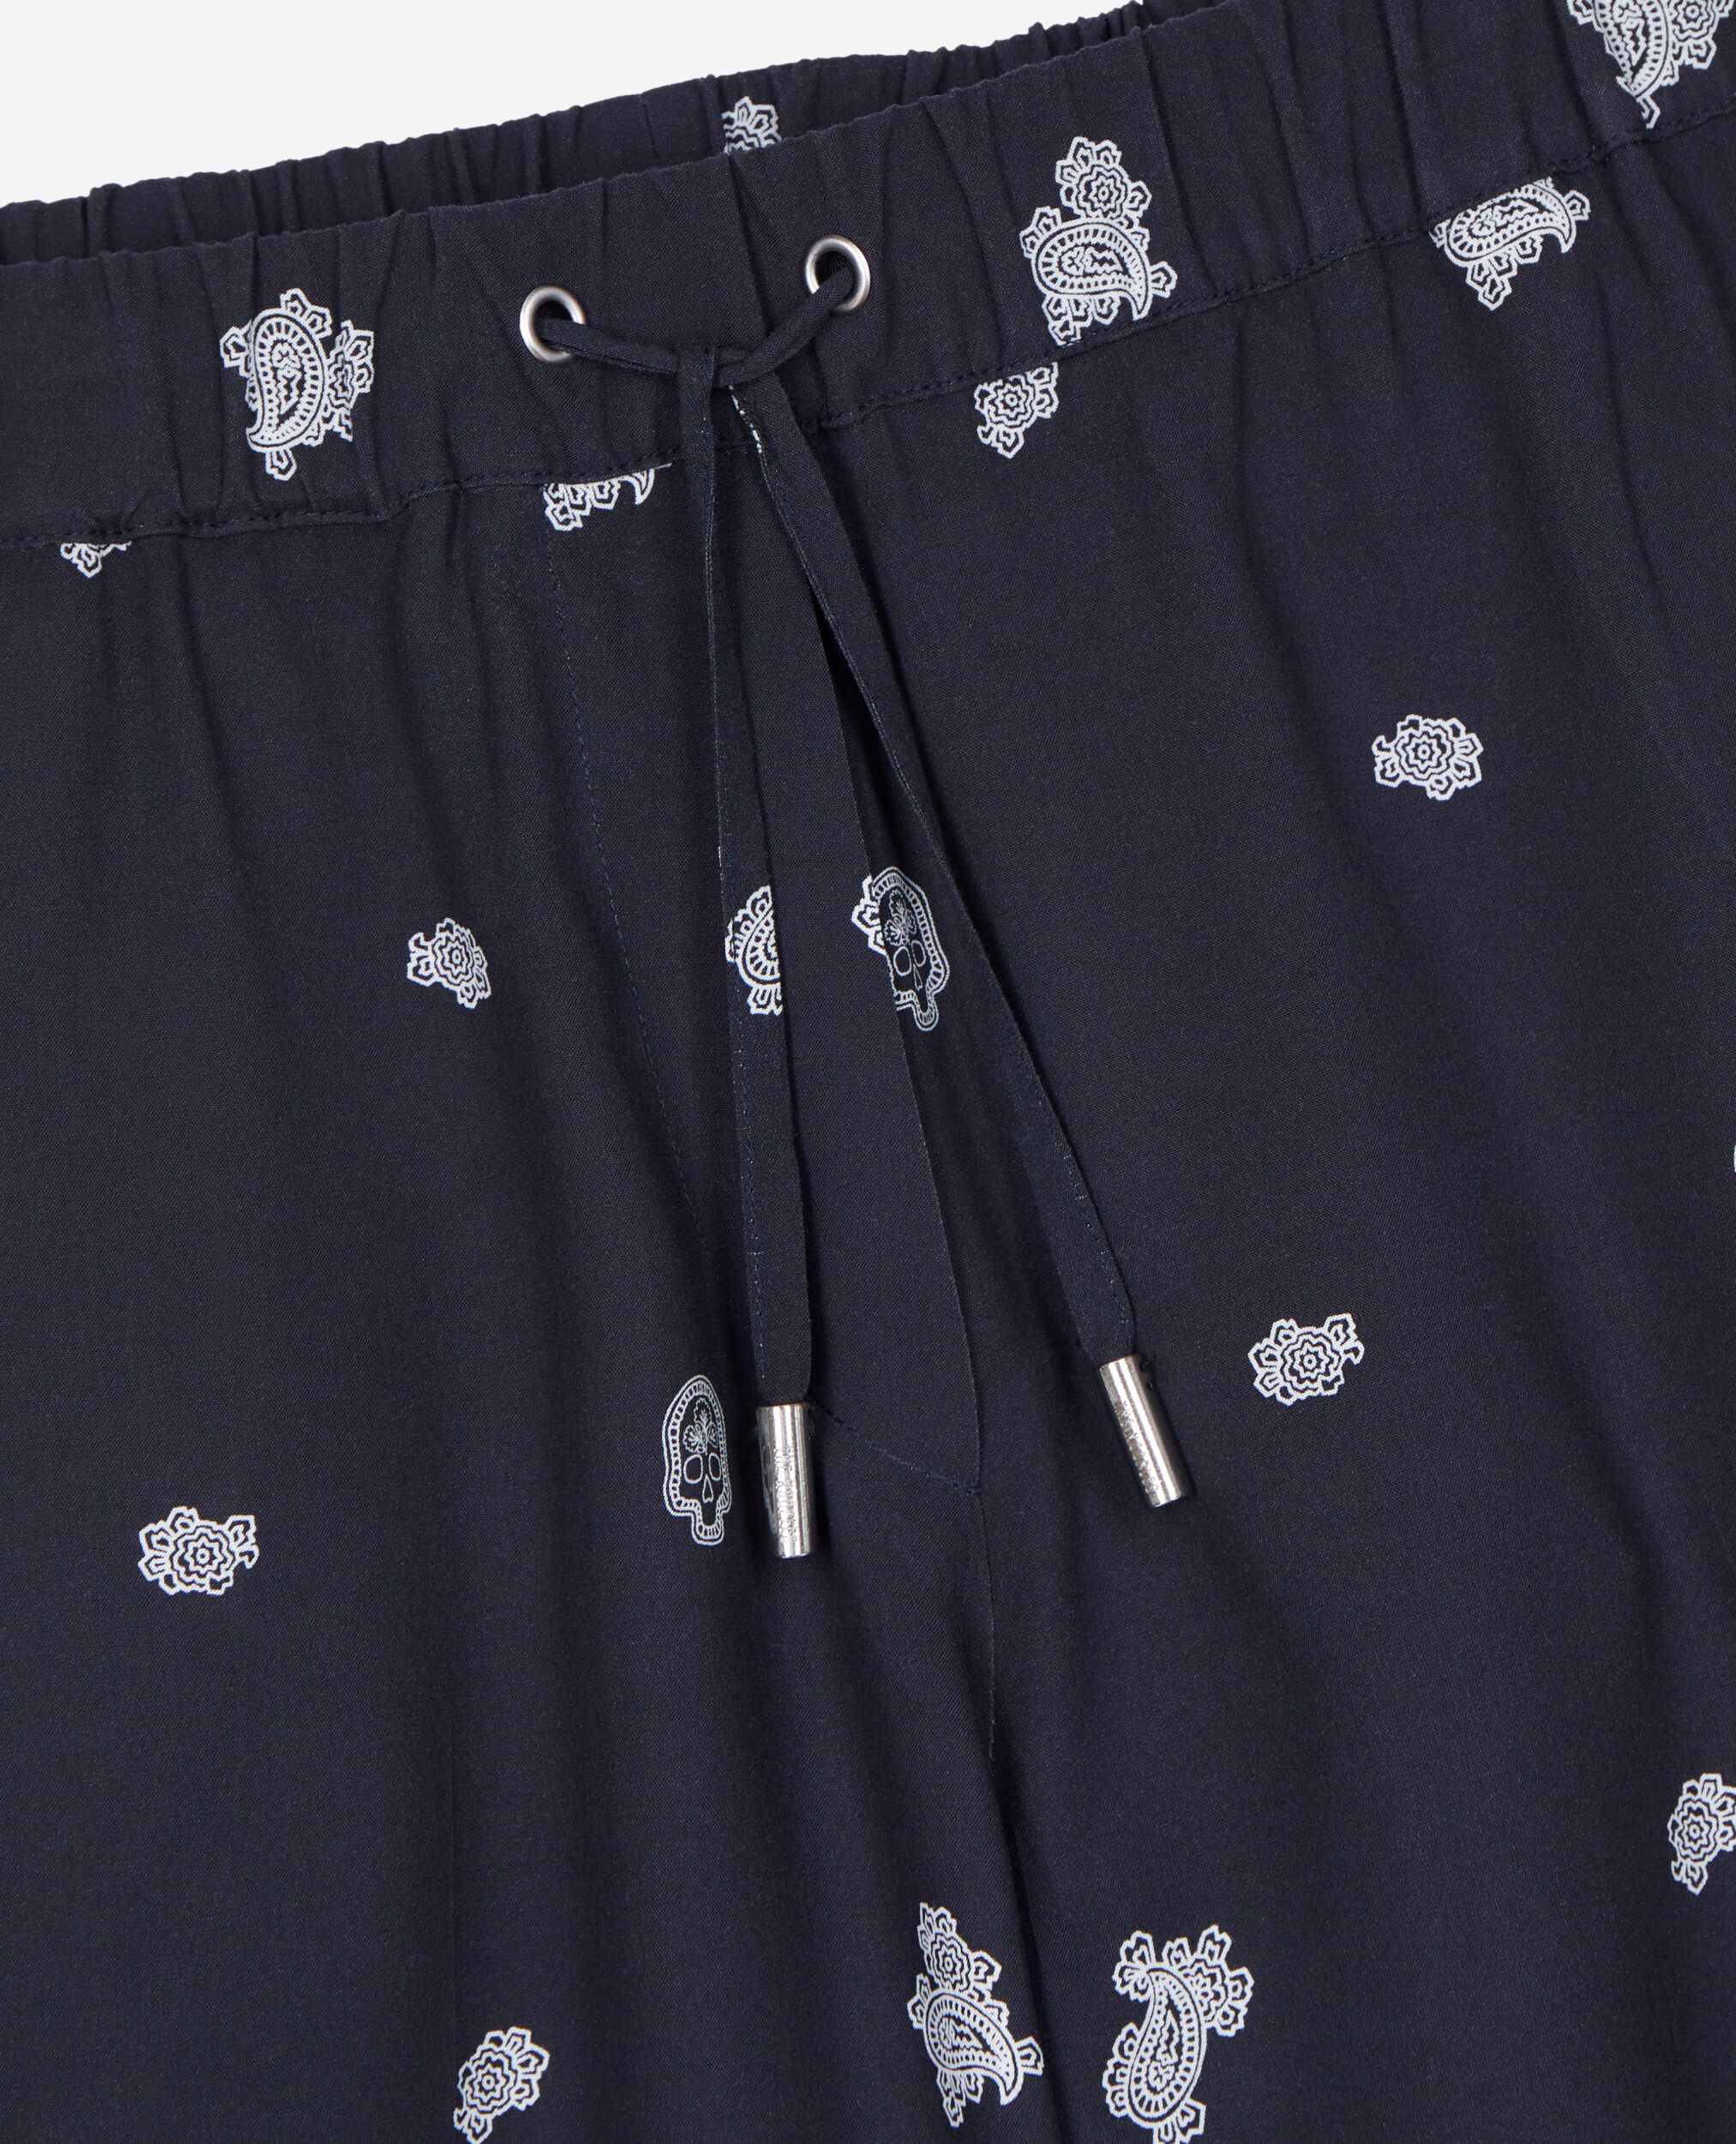 Printed shorts, NAVY / WHITE, hi-res image number null